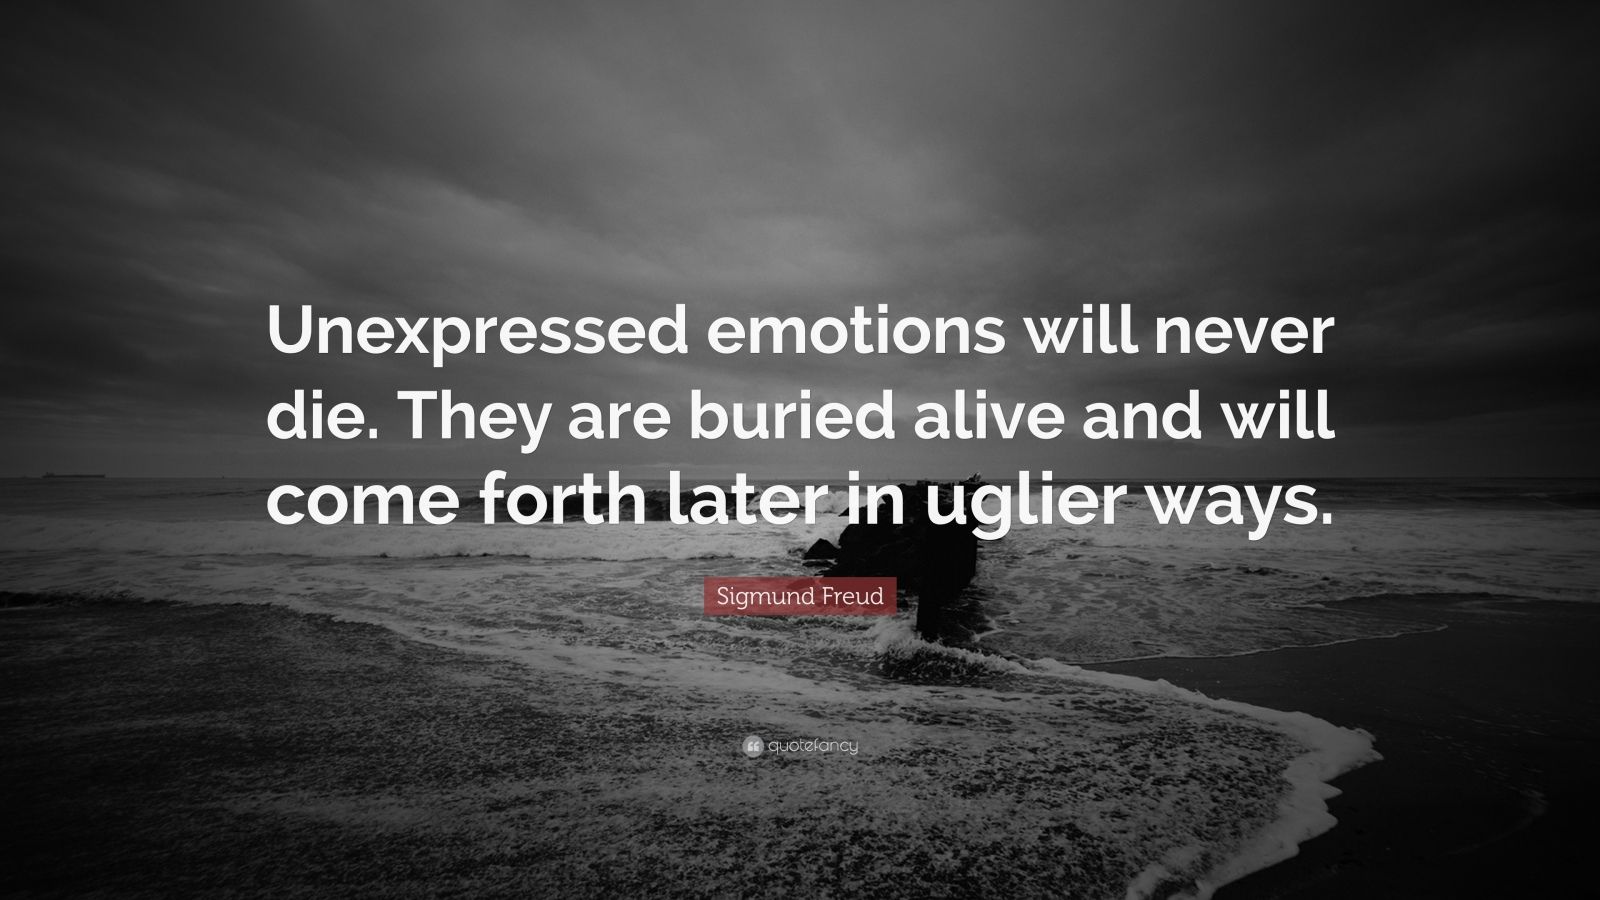 Sigmund Freud Quote “Unexpressed emotions will never die. They are